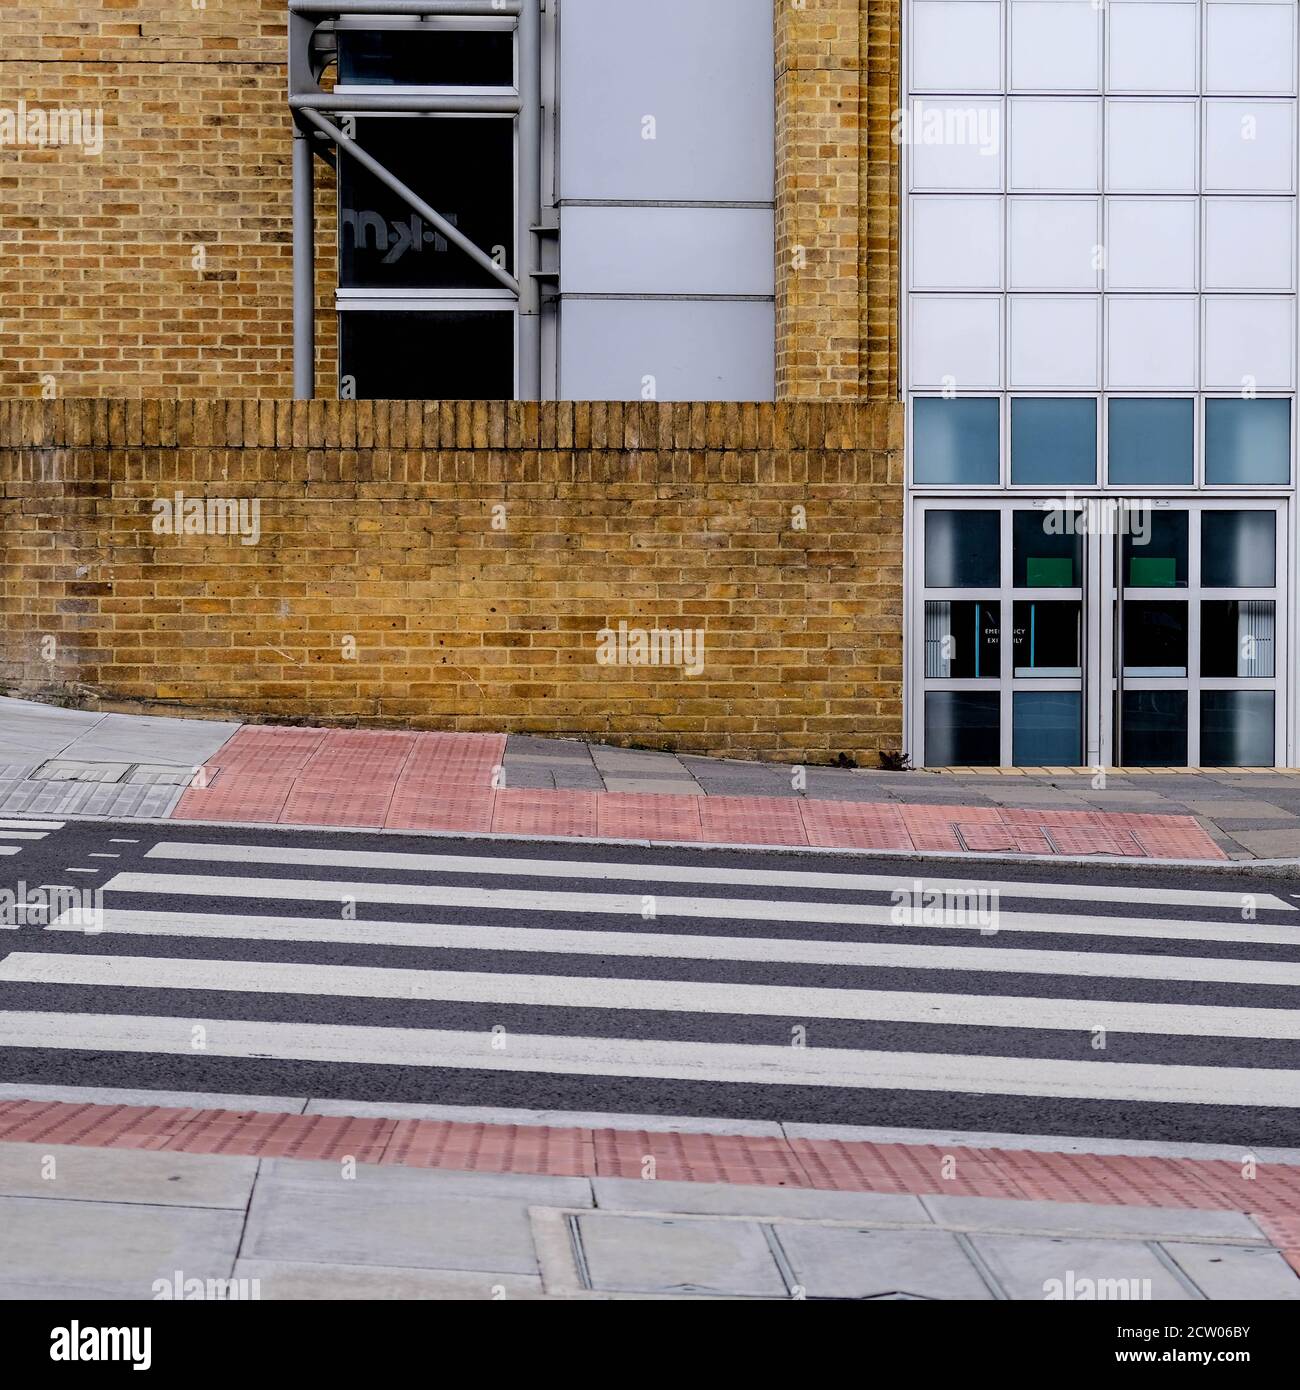 Pedestrian Or Zebra Crossing Road Crossing Markings, With No People Stock Photo